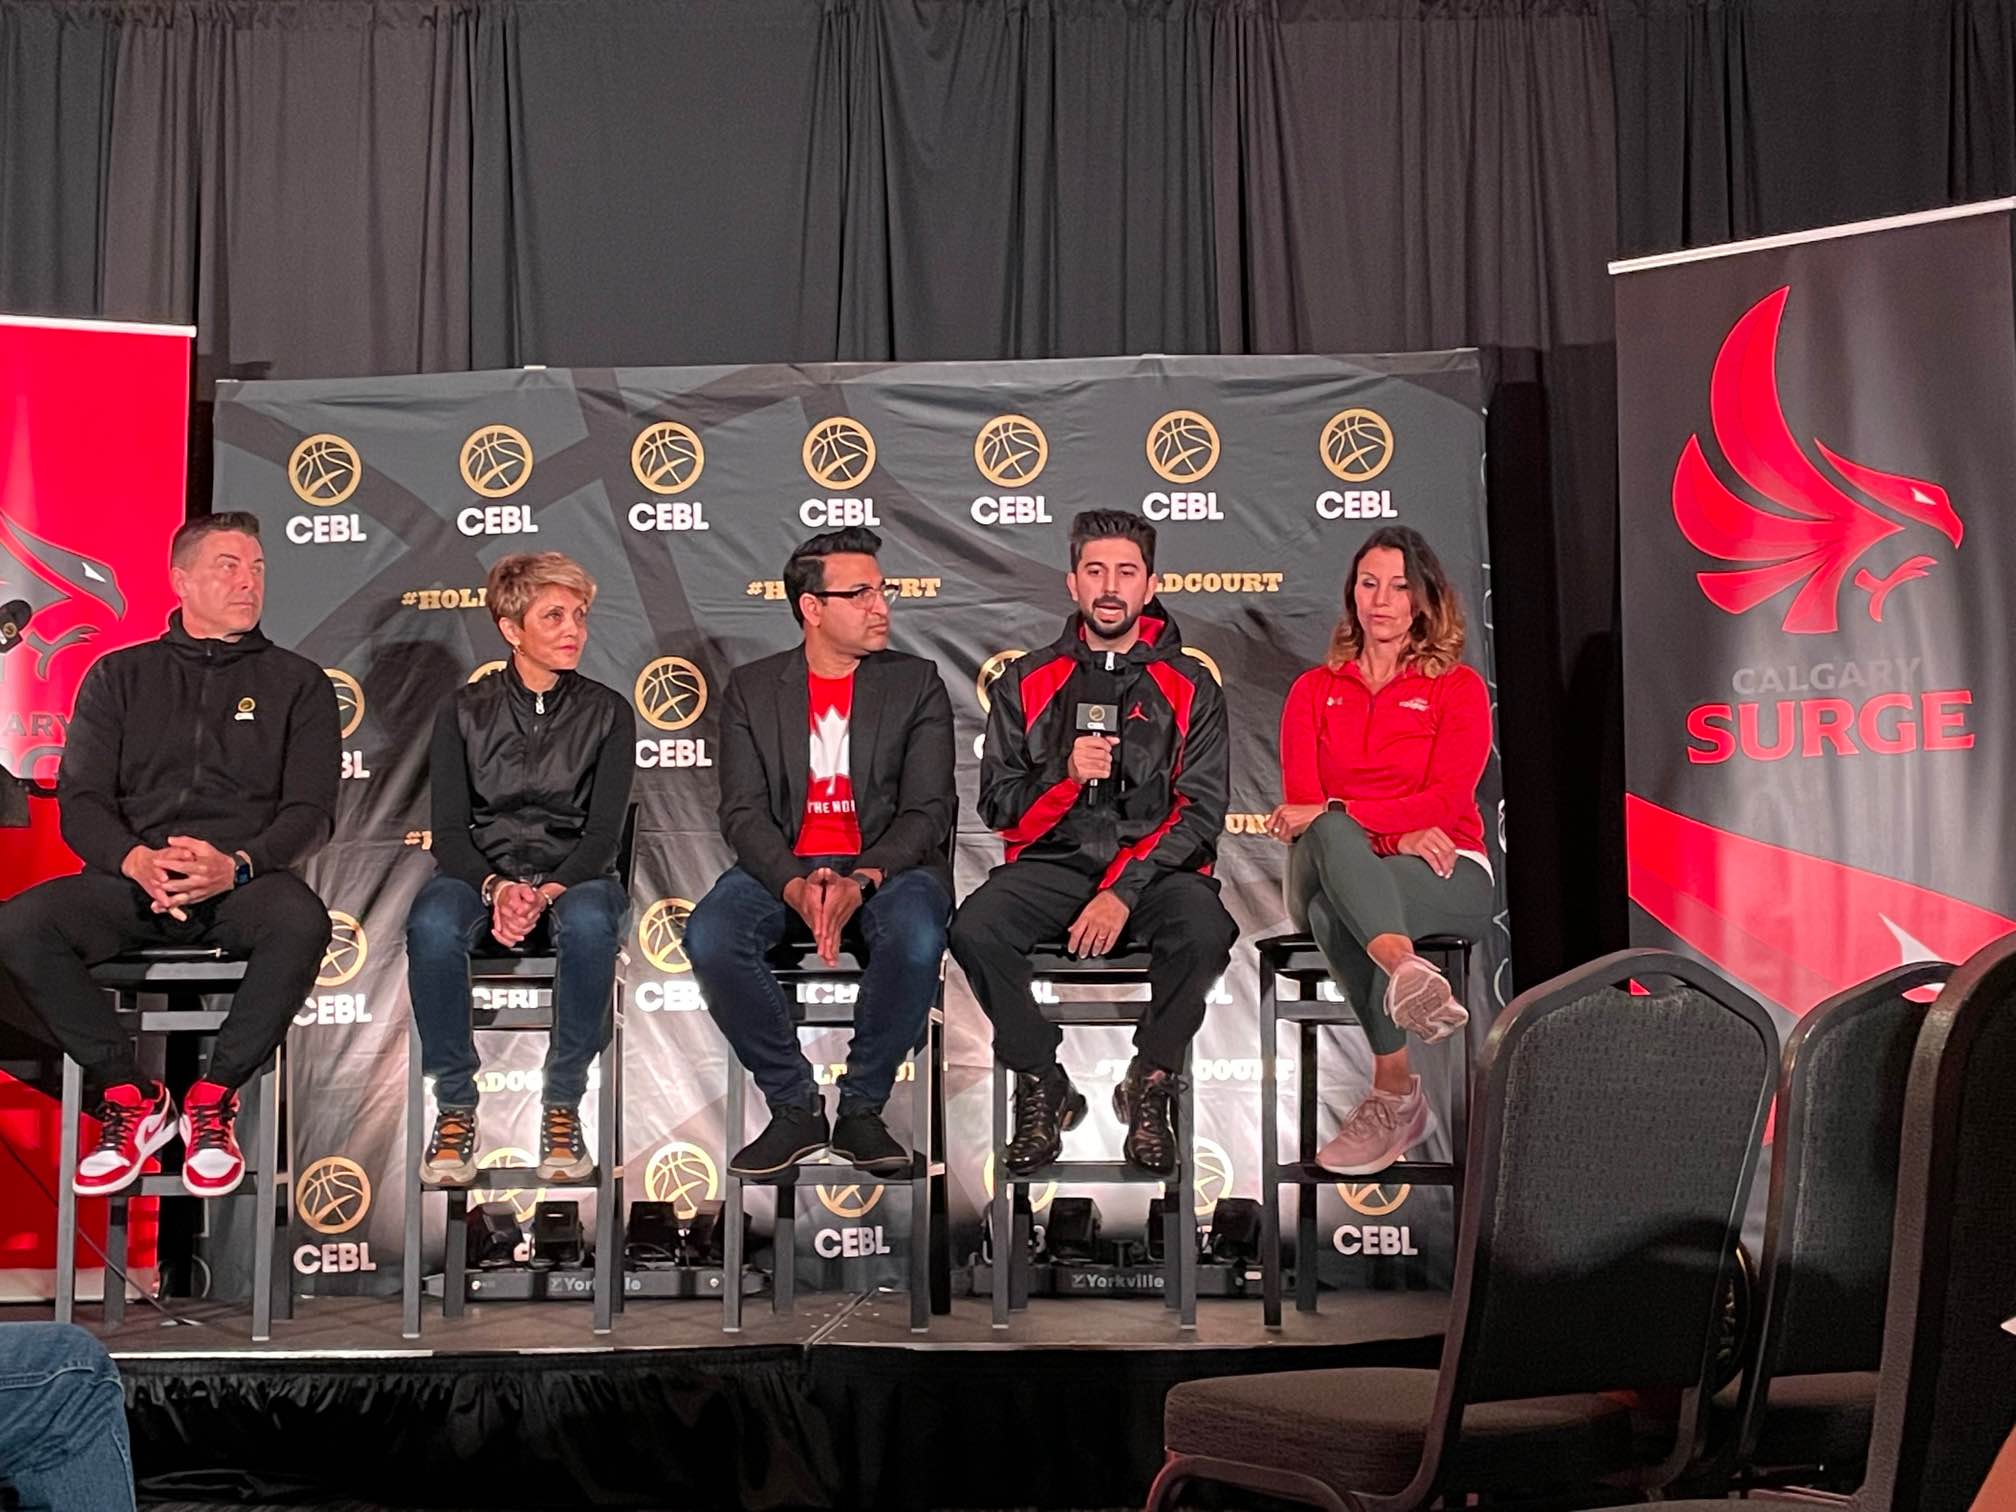 Officials sit on stage to unveil the new Calgary Surge CEBL team name and logo. Red and black banners are draped on either side of the stage bearing a logo design modeled after a bird of prey